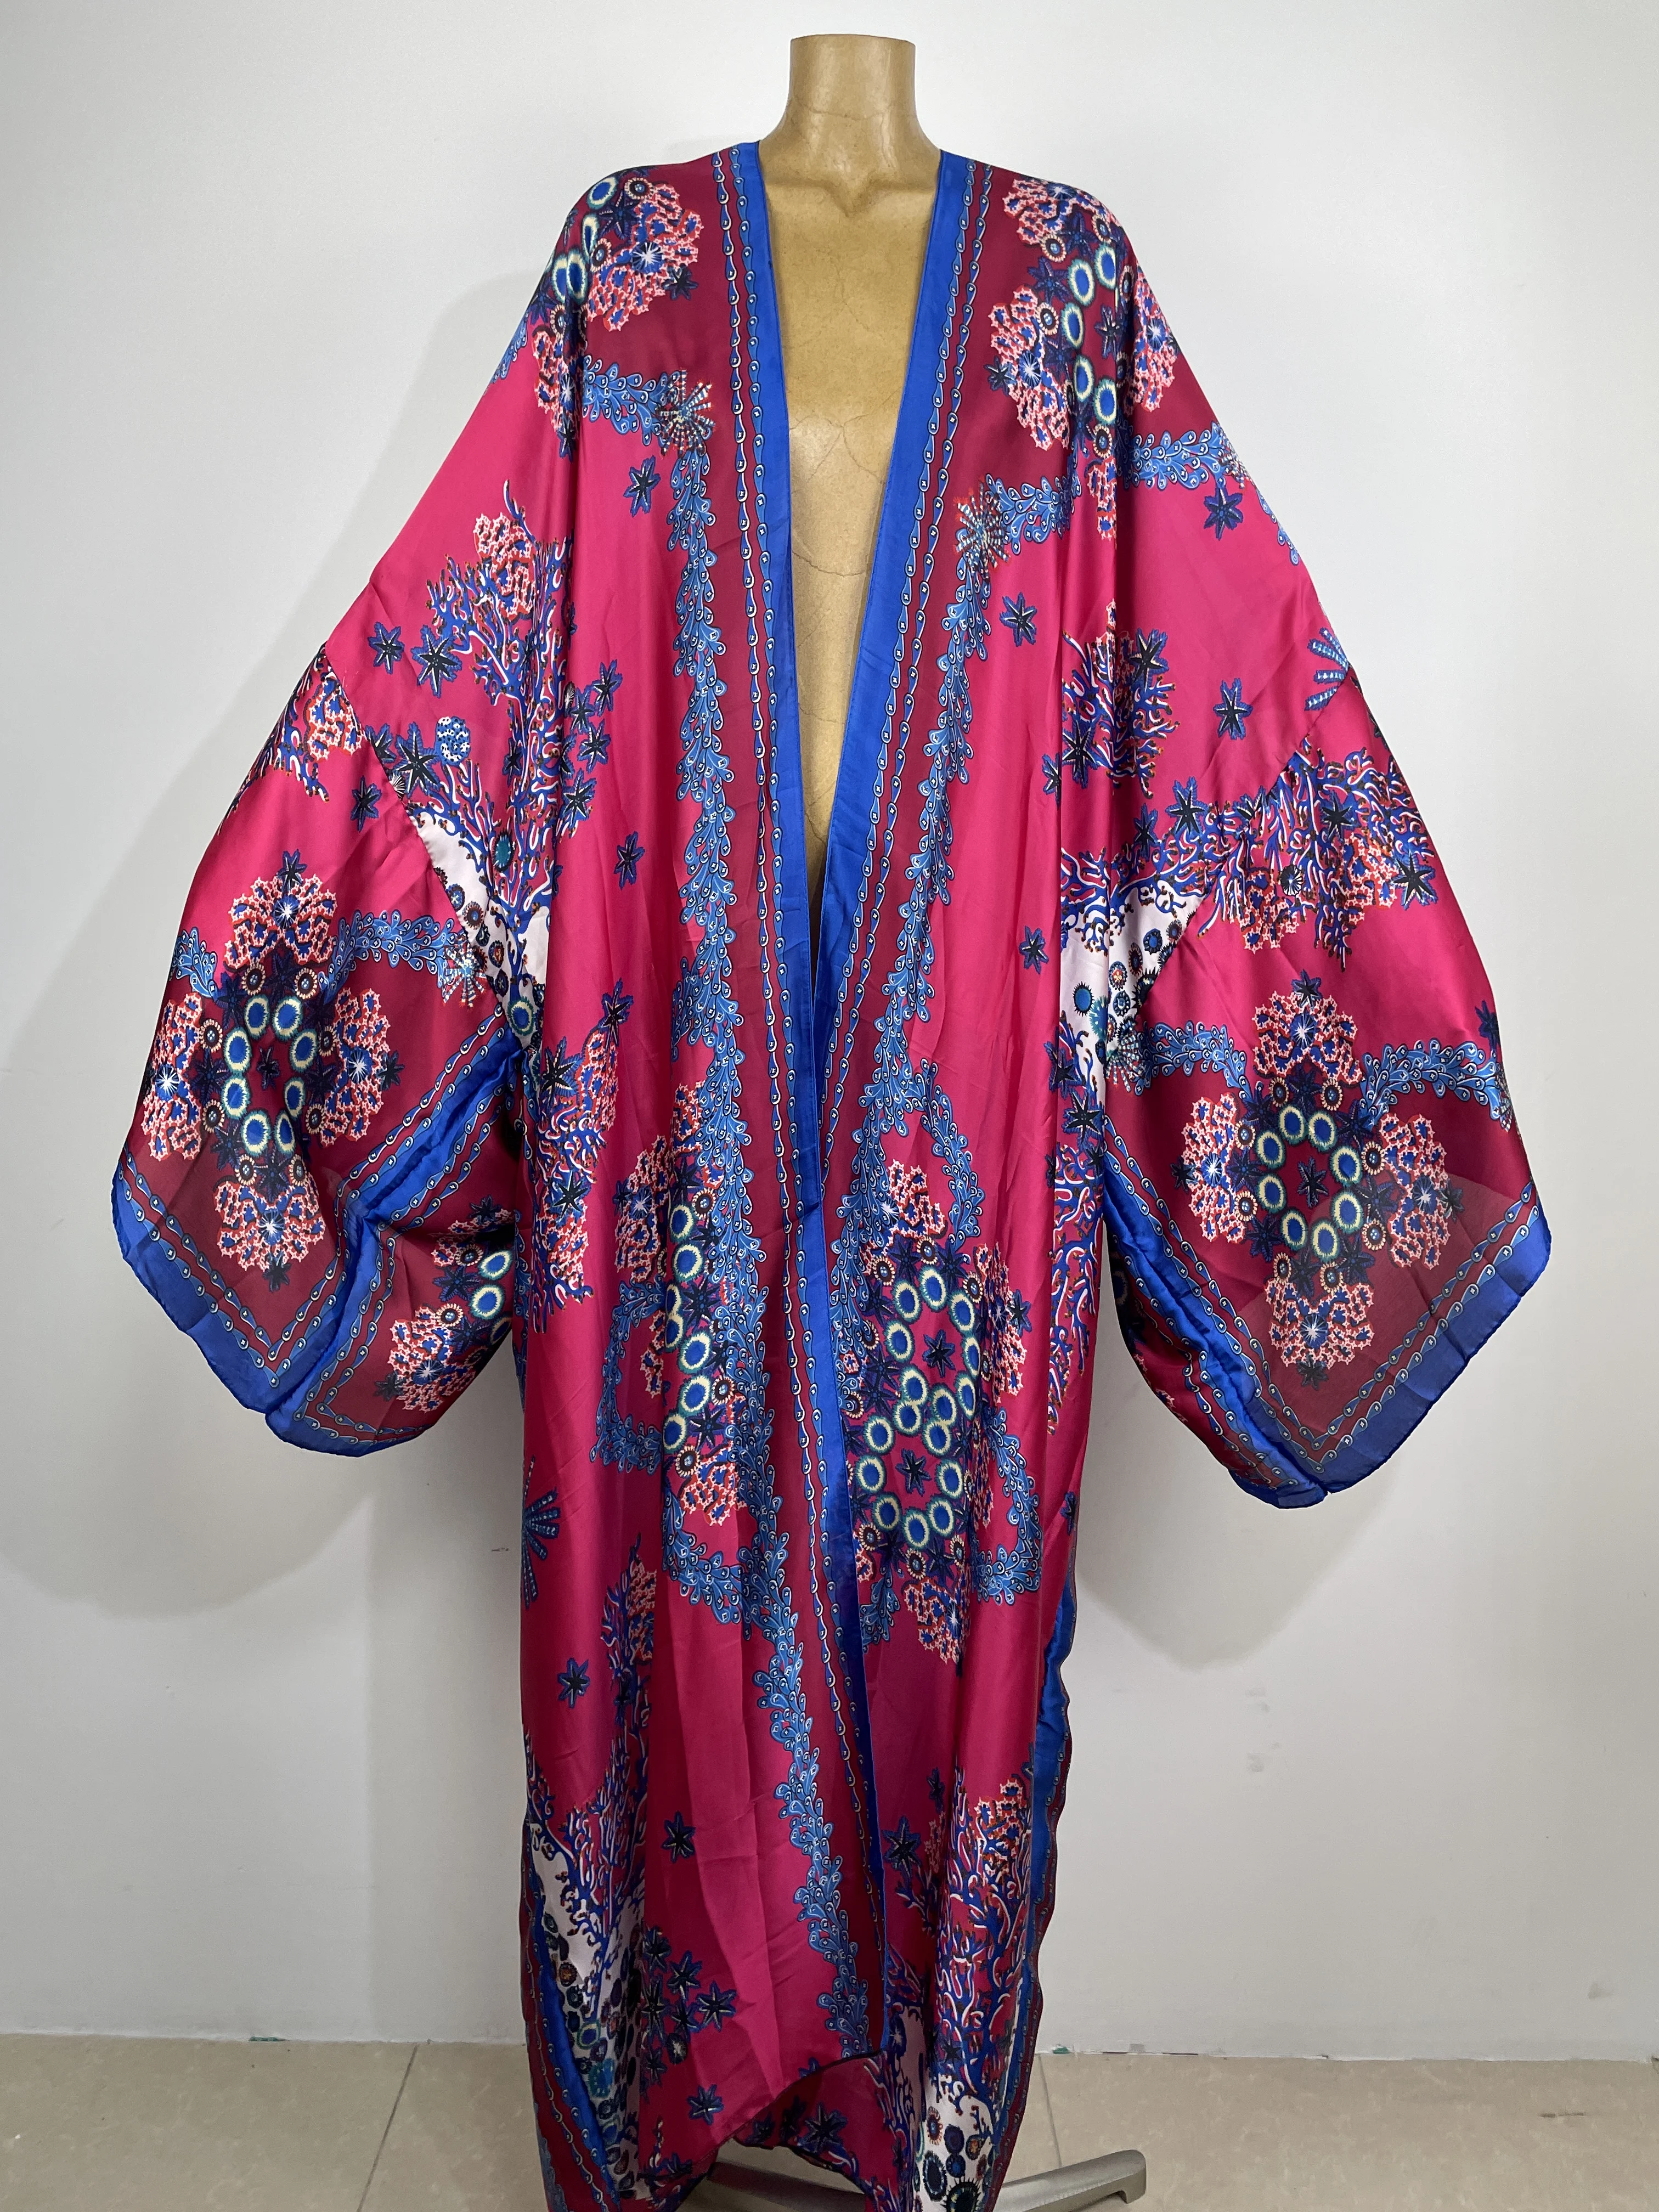 

2023 Hot New Middle East Kimono Women Cardigan Stitch Kaftan Cocktail Sexy Boho Beach Cover Up African Holiday Long Sleeve Robe